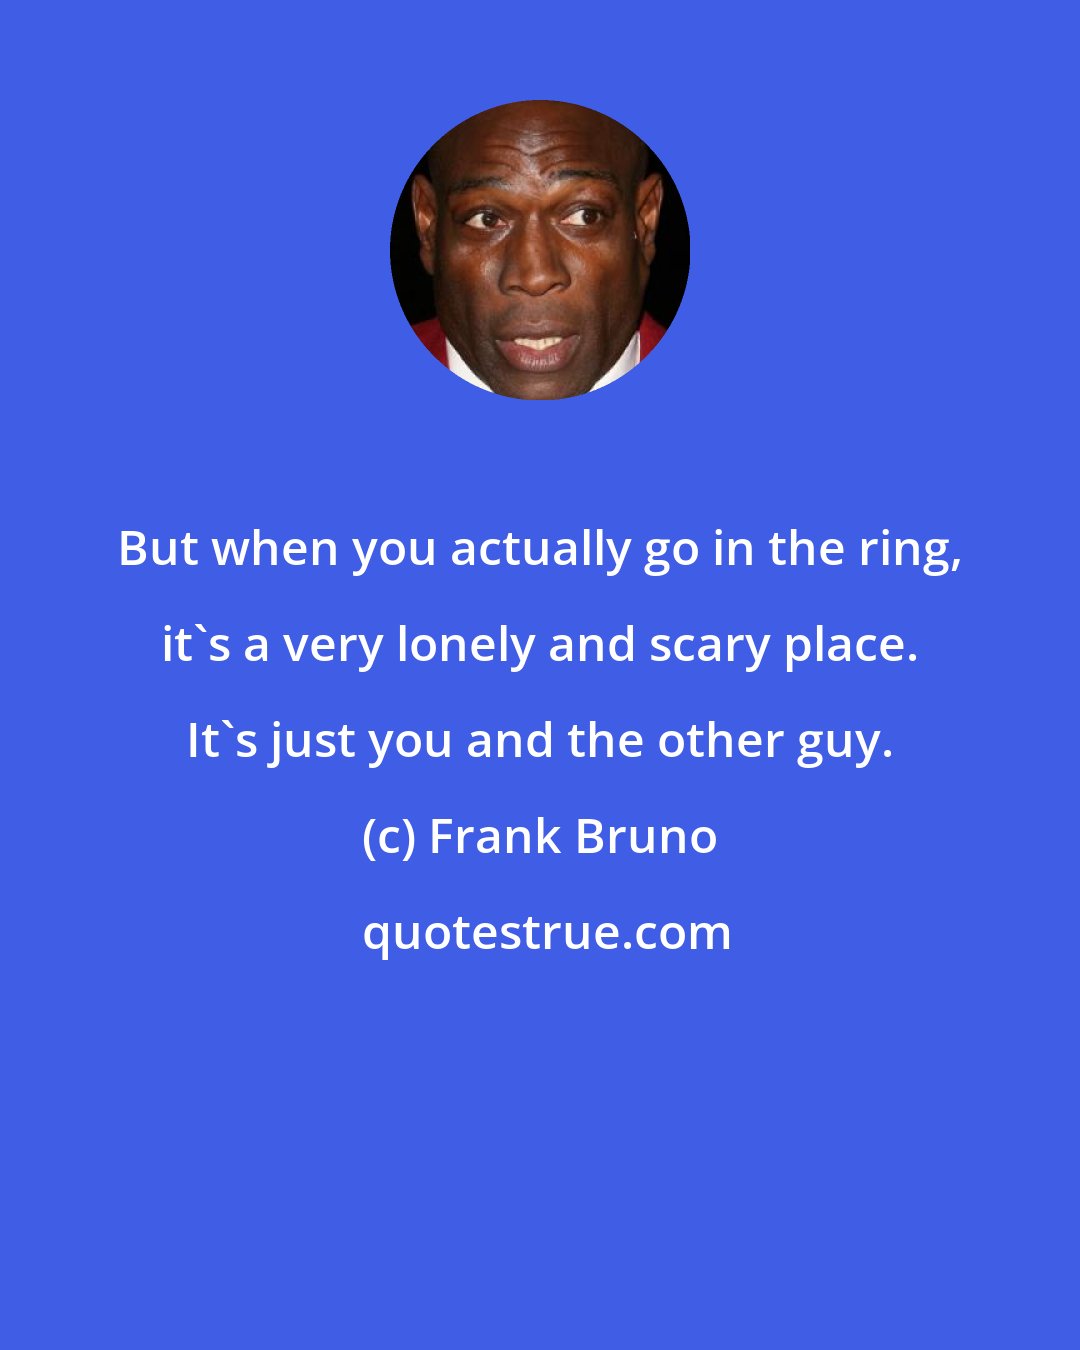 Frank Bruno: But when you actually go in the ring, it's a very lonely and scary place. It's just you and the other guy.